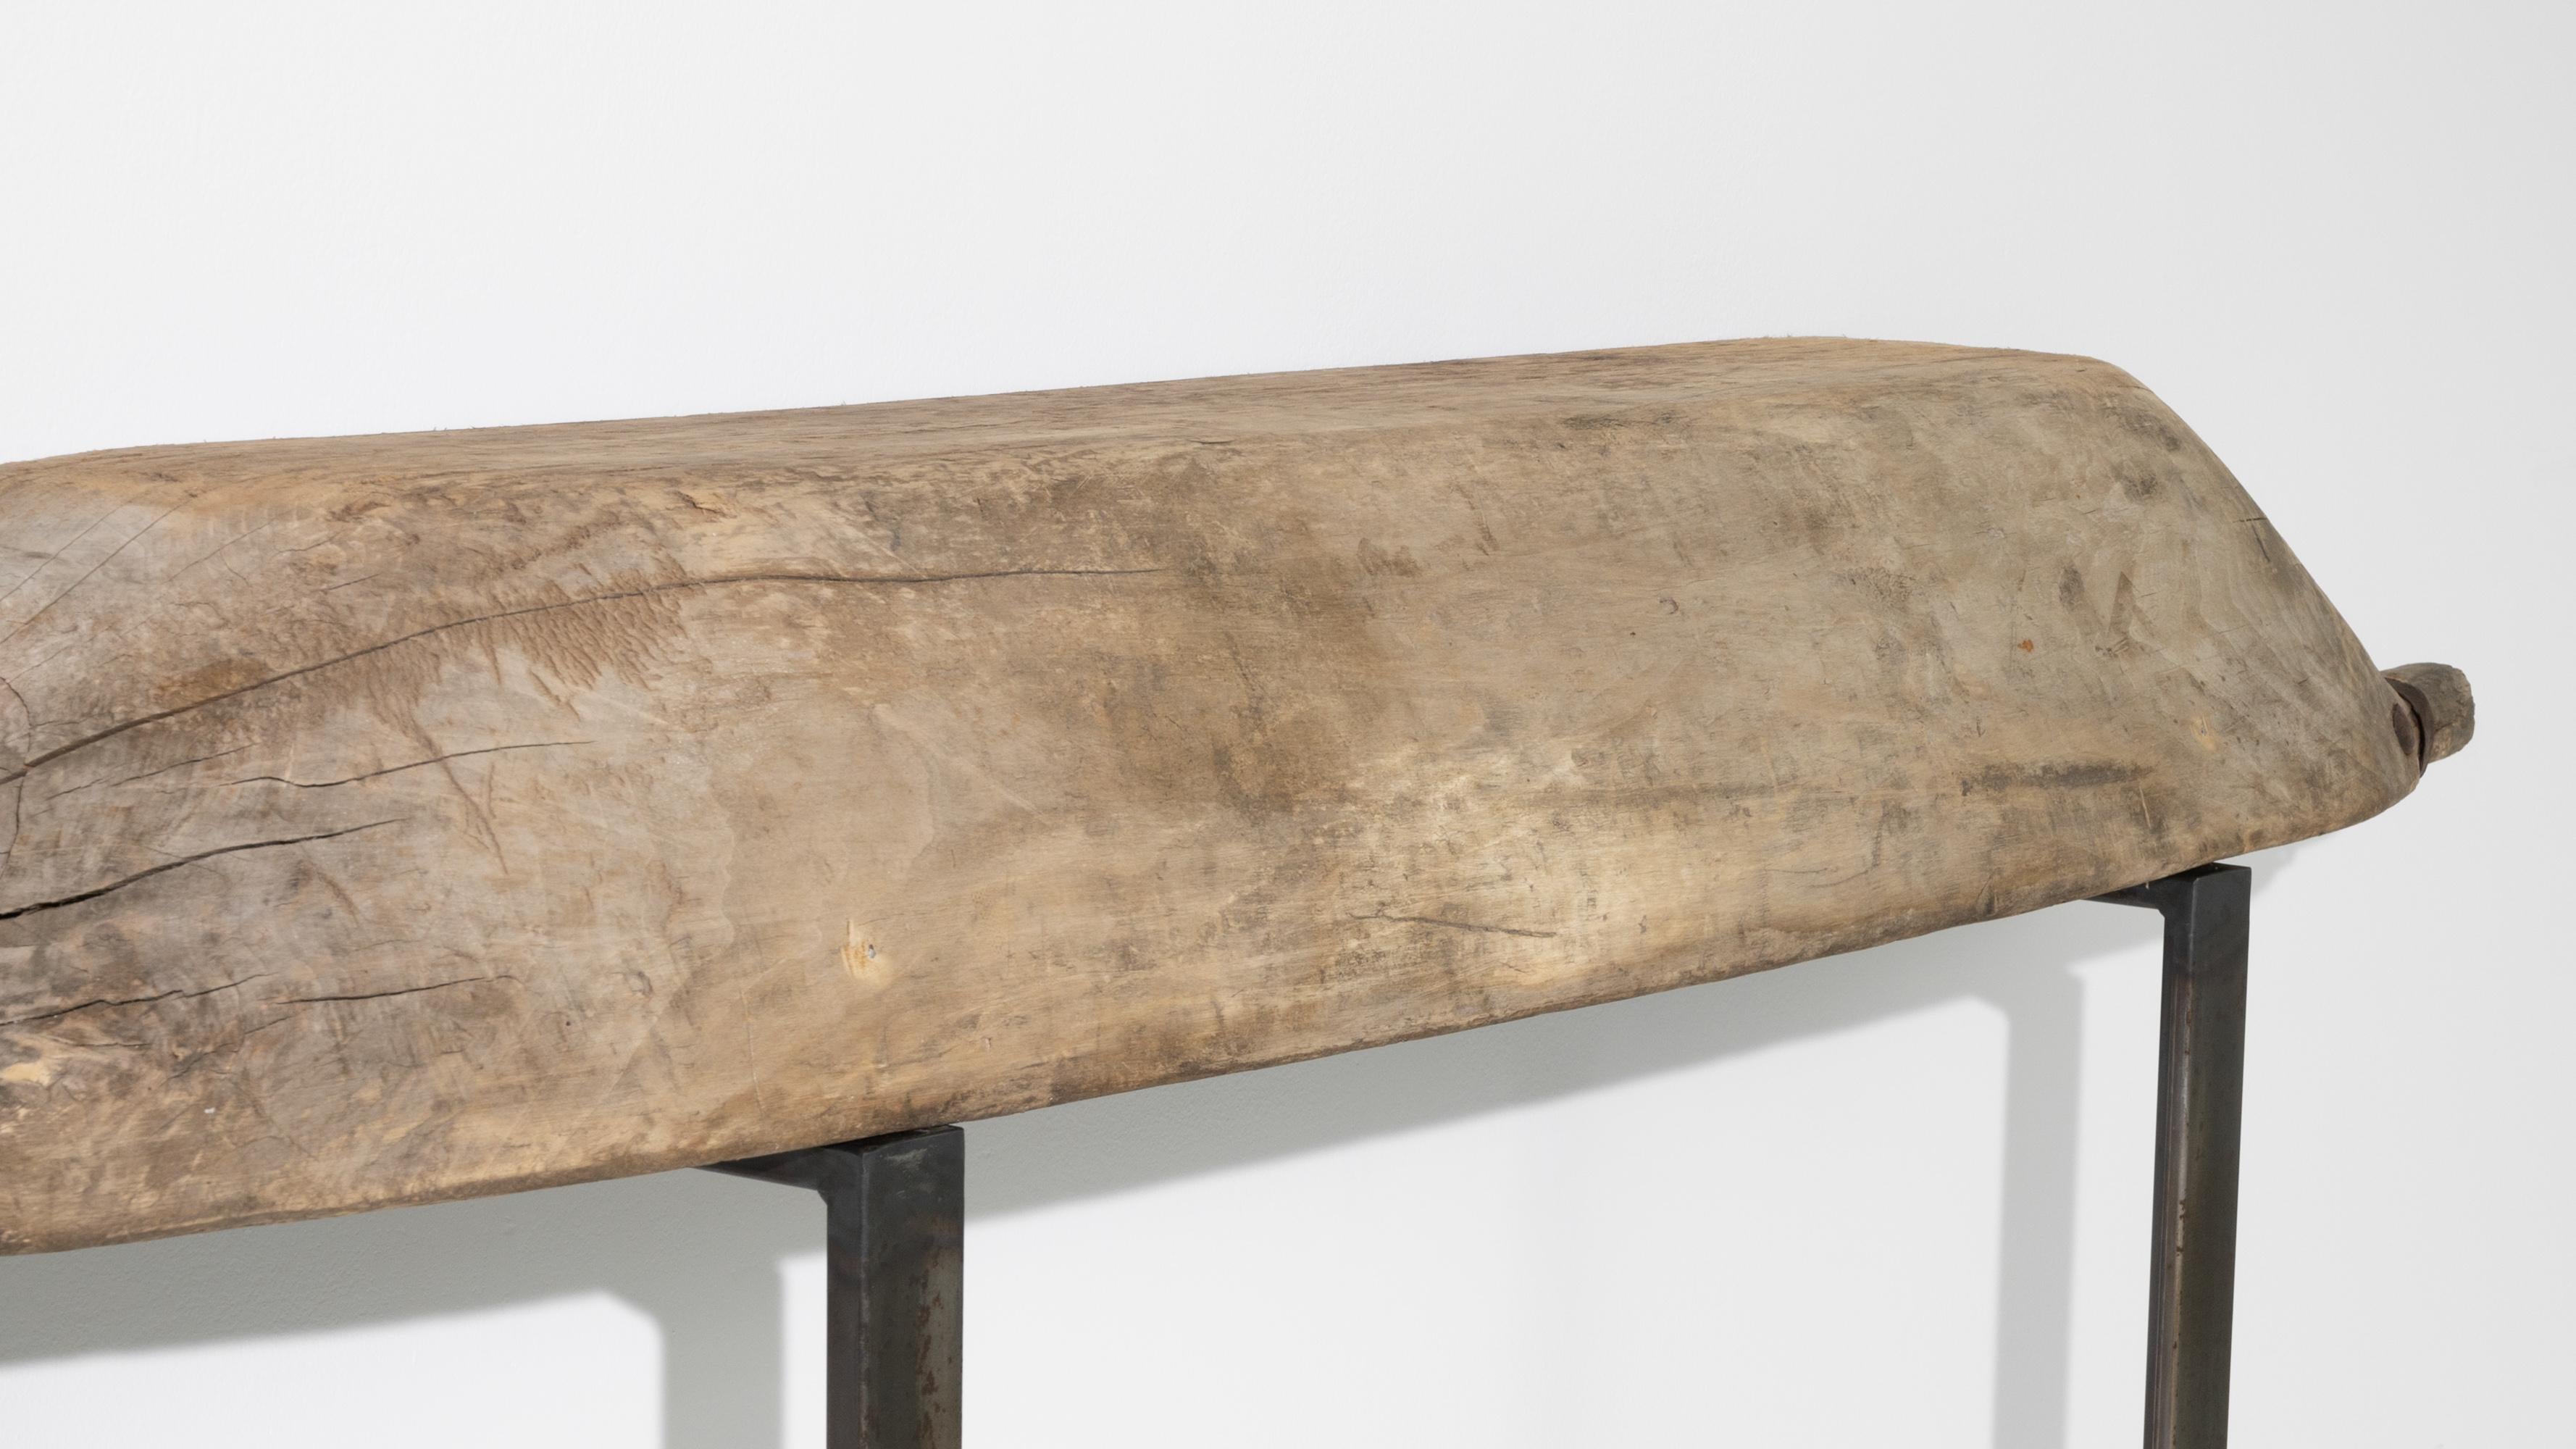 This antique metal console with a wooden top
was crafted in Poland. A concave wooden mixing bowl, made circa 1800; resembles a half cut pirogue, elevated on two perpendicular metal legs to shape a unique styled console. Original iron junctions